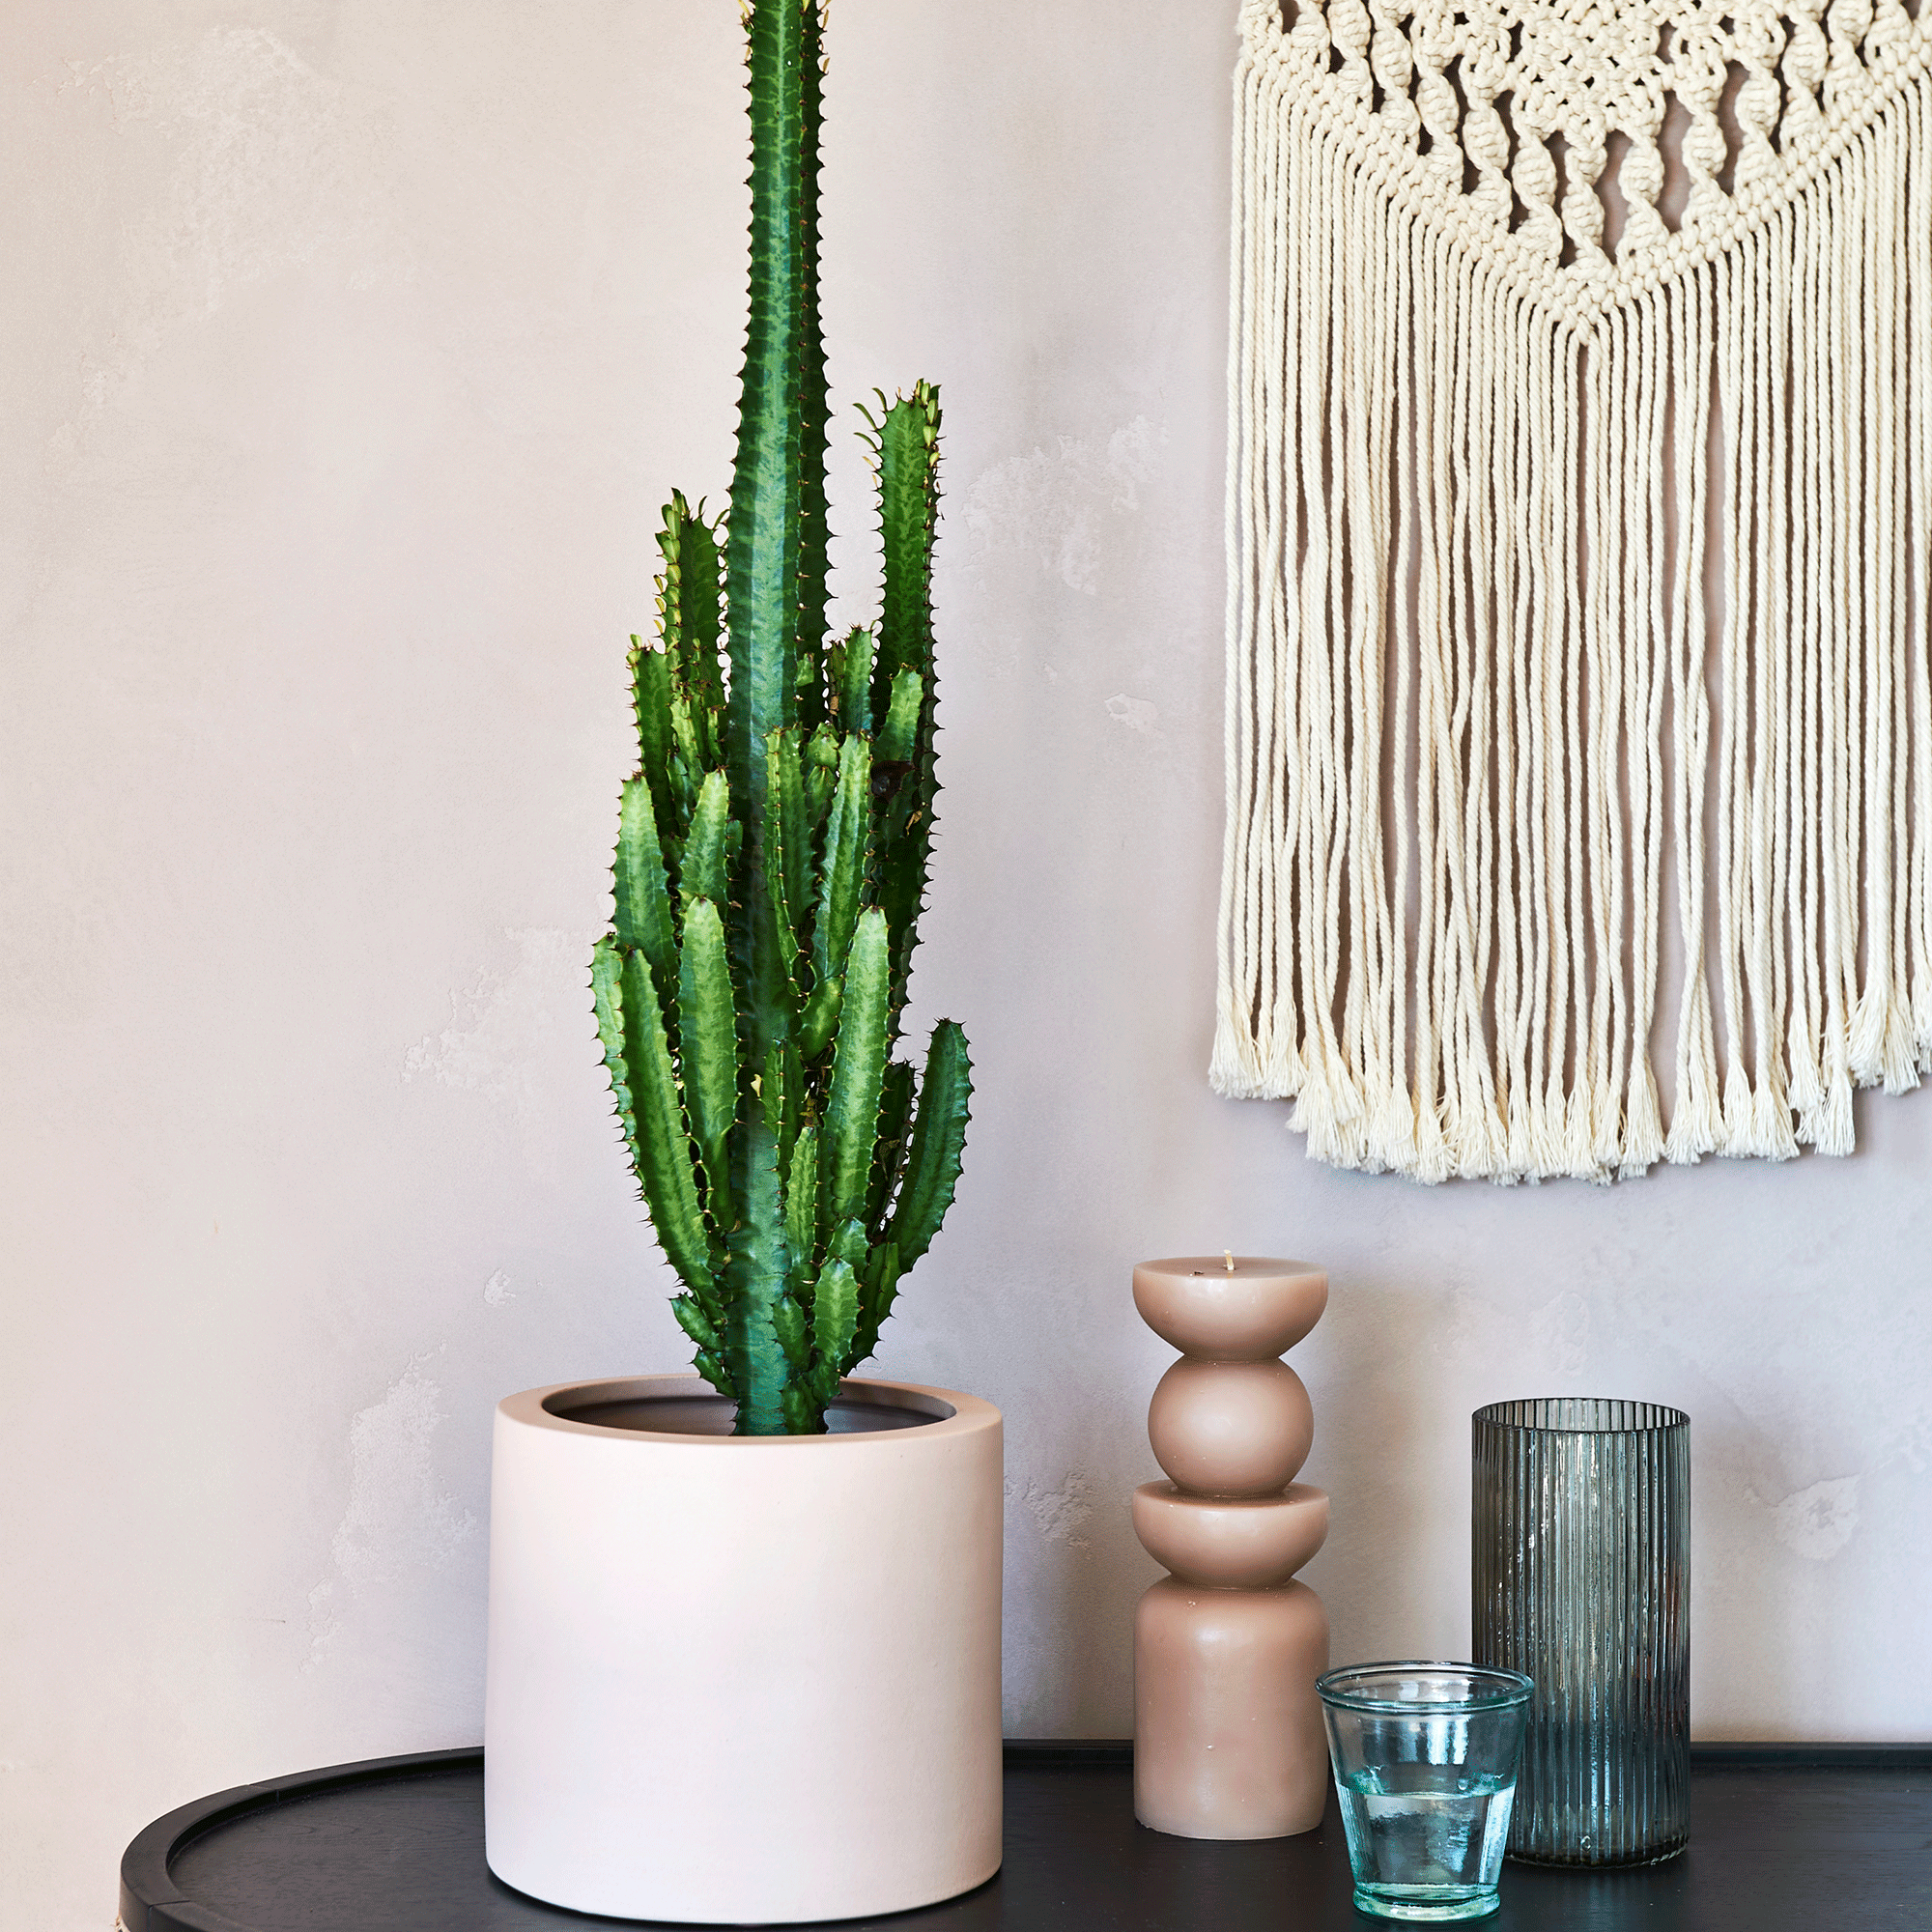 Cactus in home